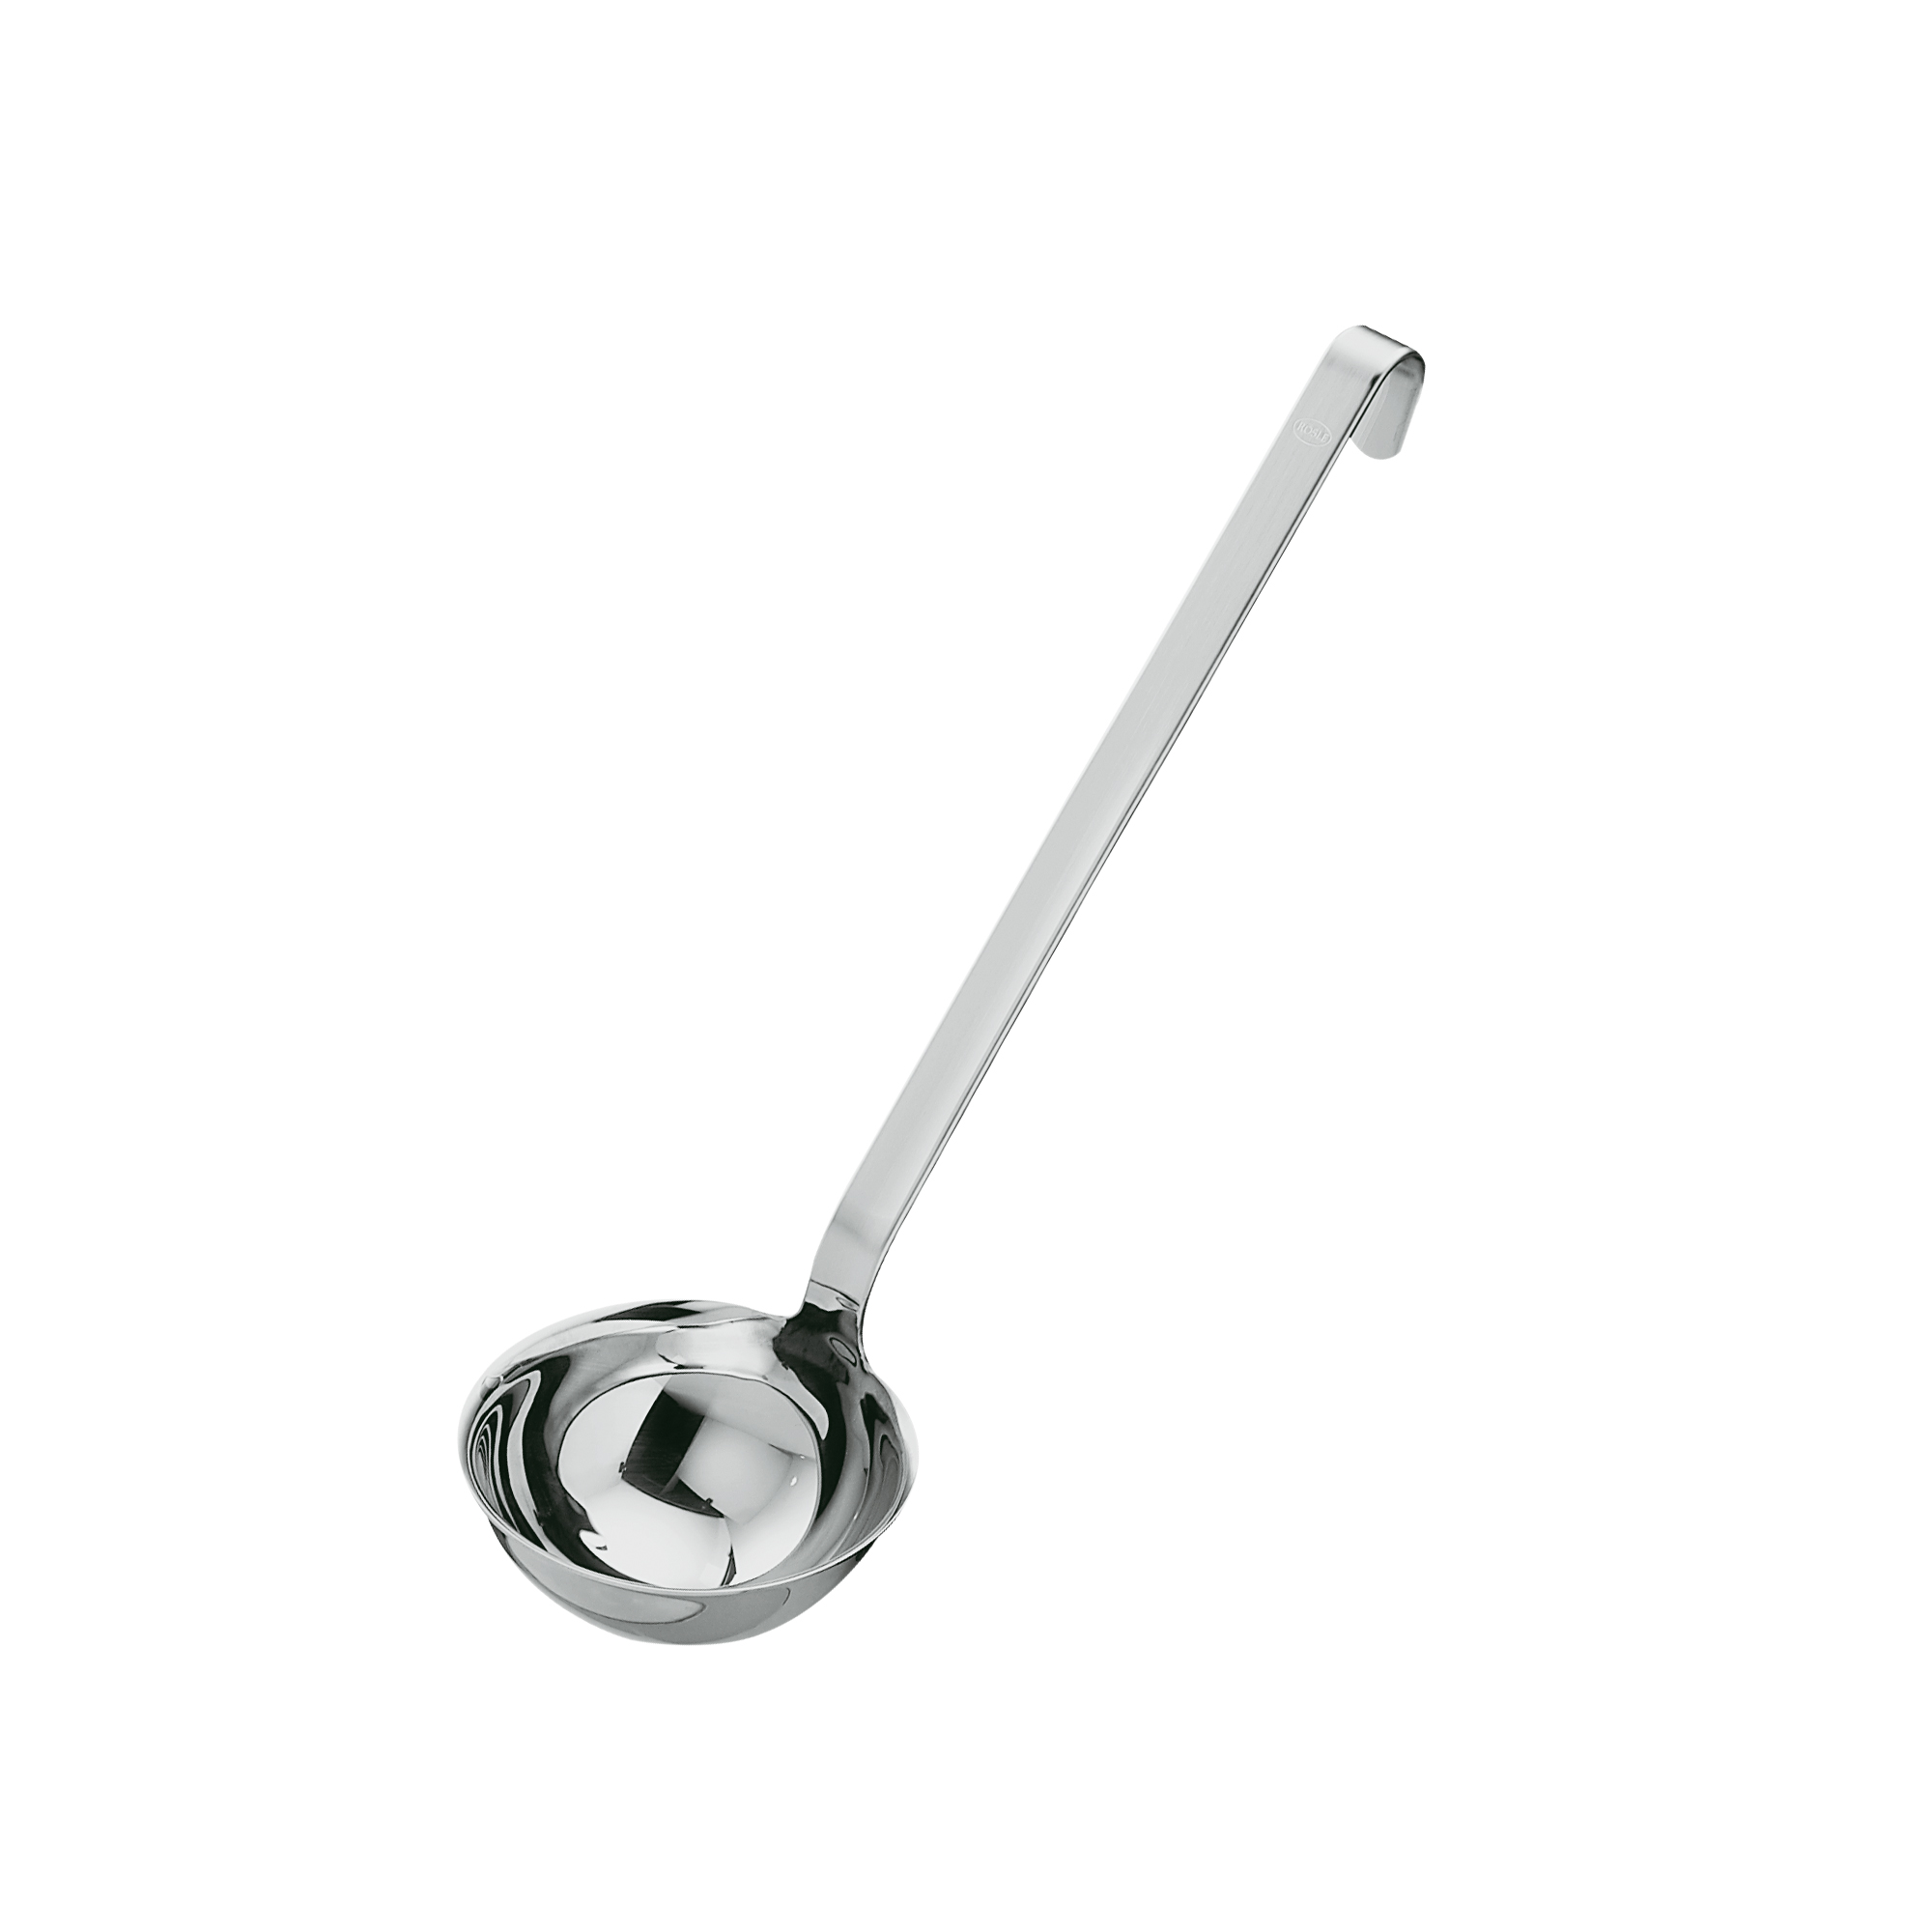 Hook Ladle with pouring rim Ø 6 cm|2.4 in.